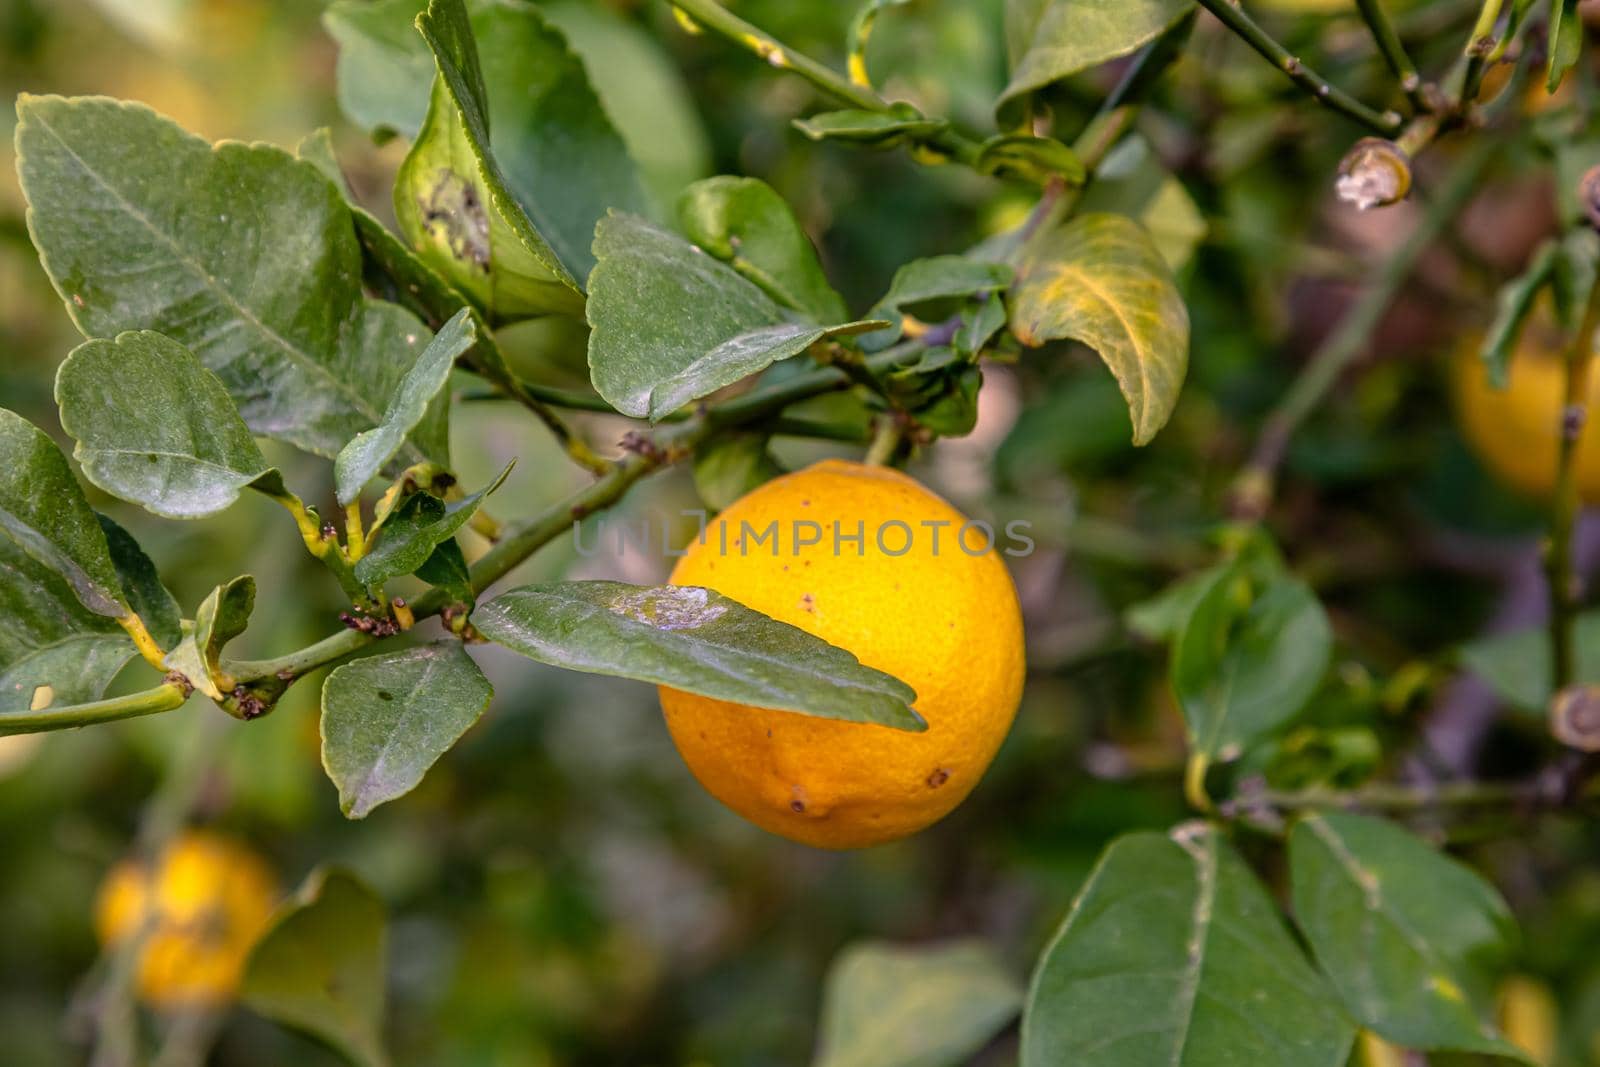 Ripe oranges grow on a tree among the foliage by Milanchikov